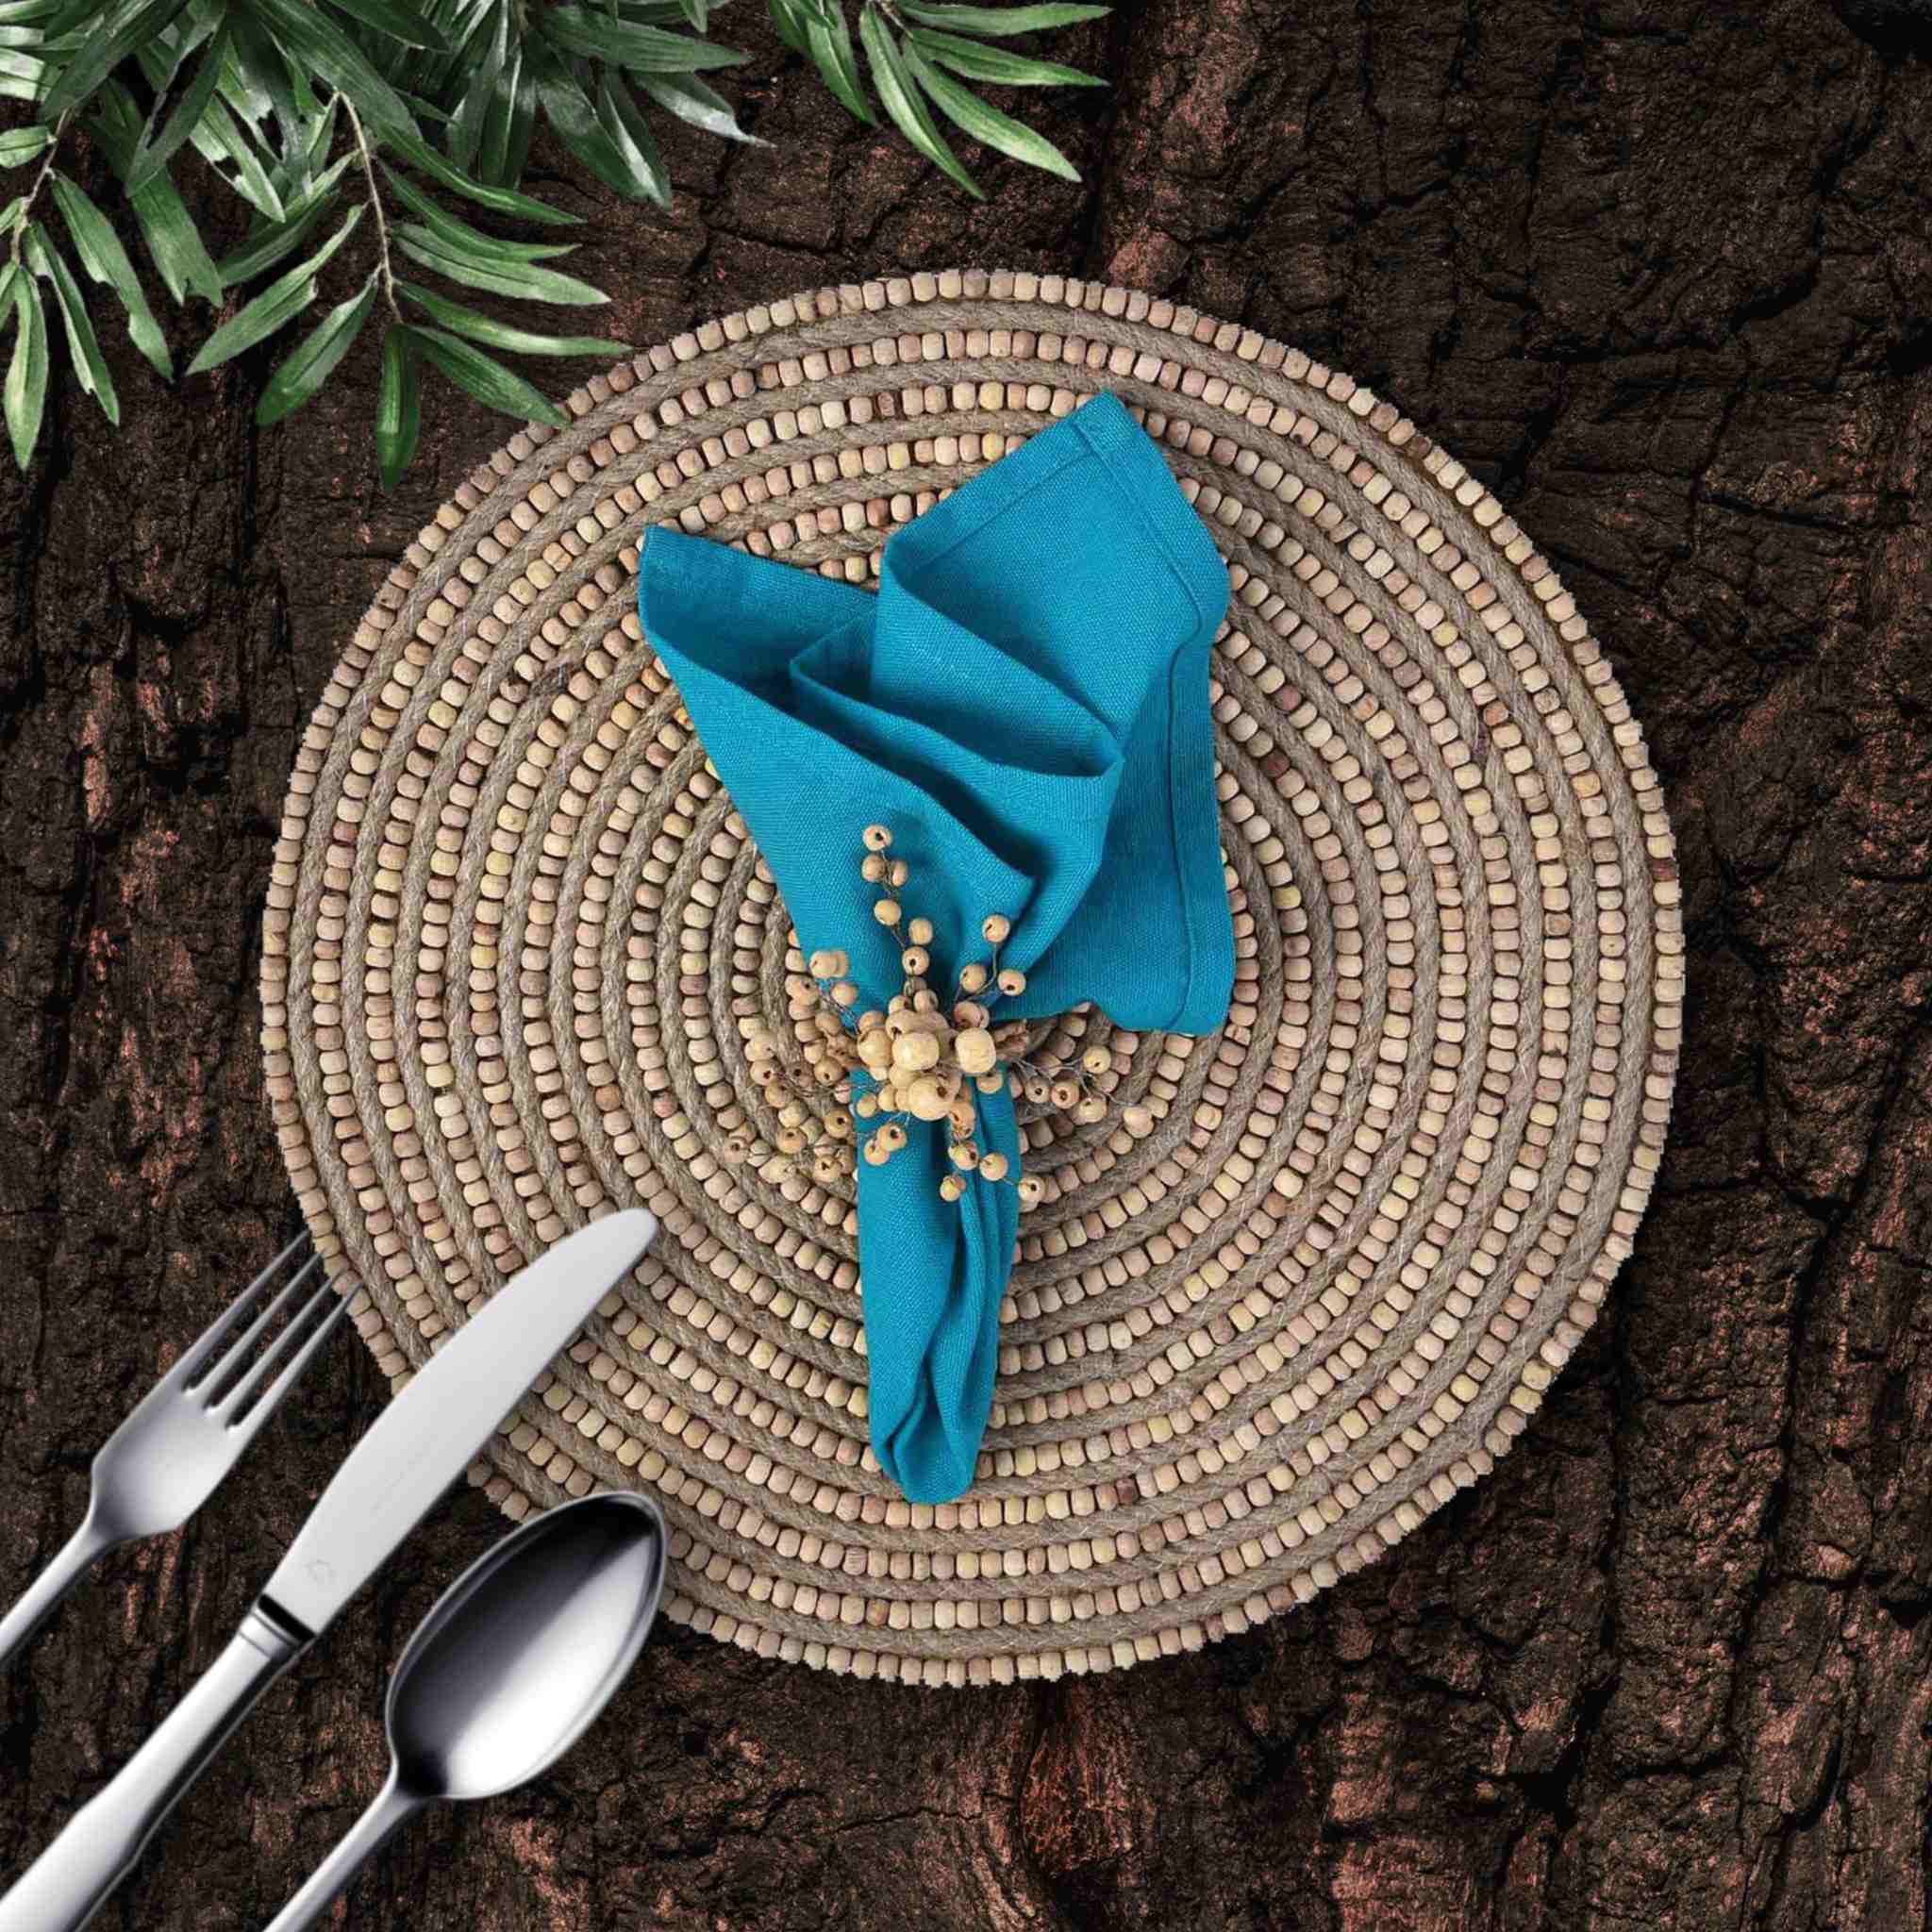 Jute & Wooden Beads Embroidered Placemat, Set of 2/4